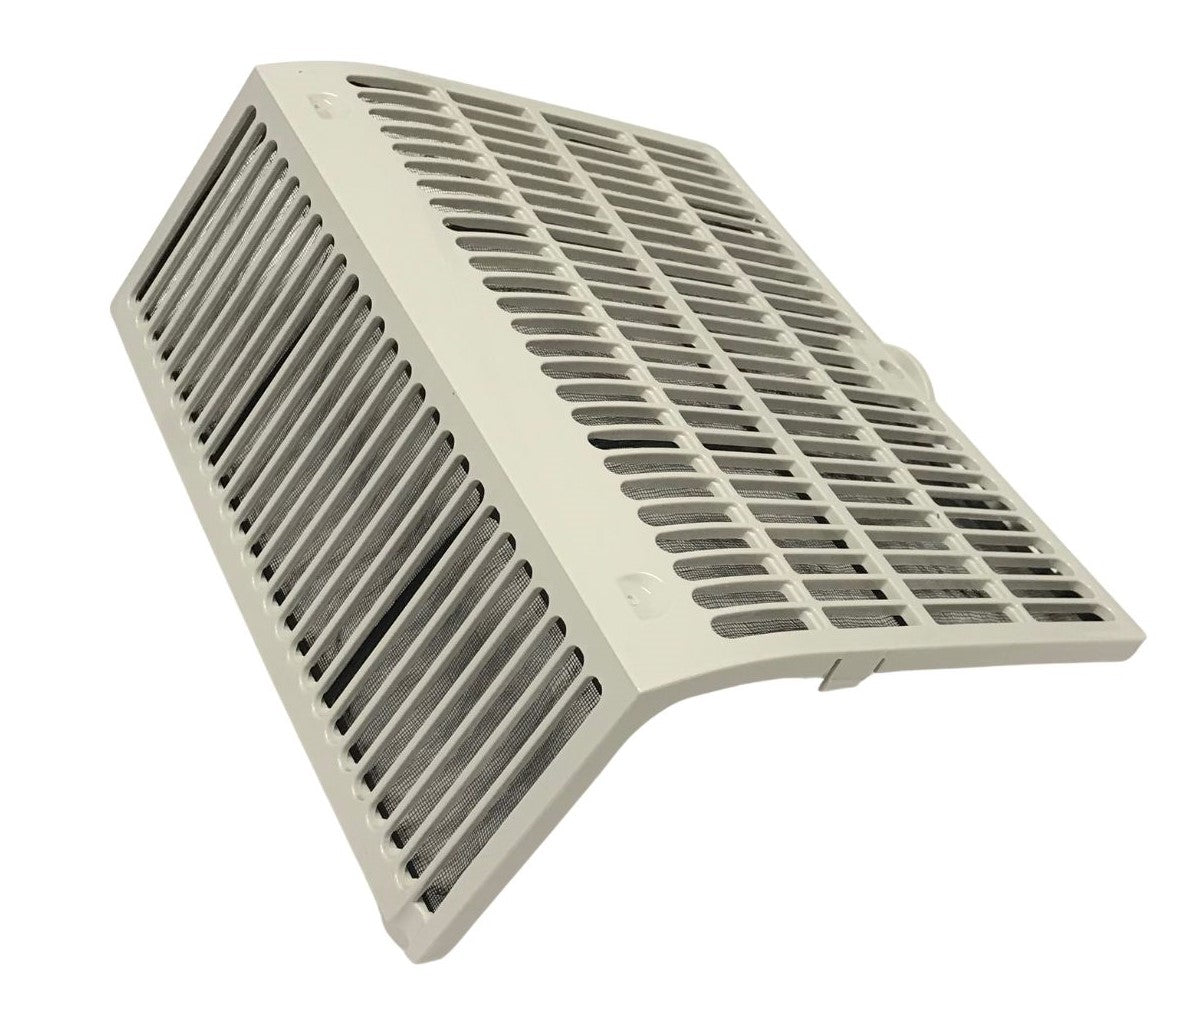 Genuine OEM LG Air Conditioner AC Lower Air Filter And Frame Originally Shipped With LP1017WSR, LP0817WSR